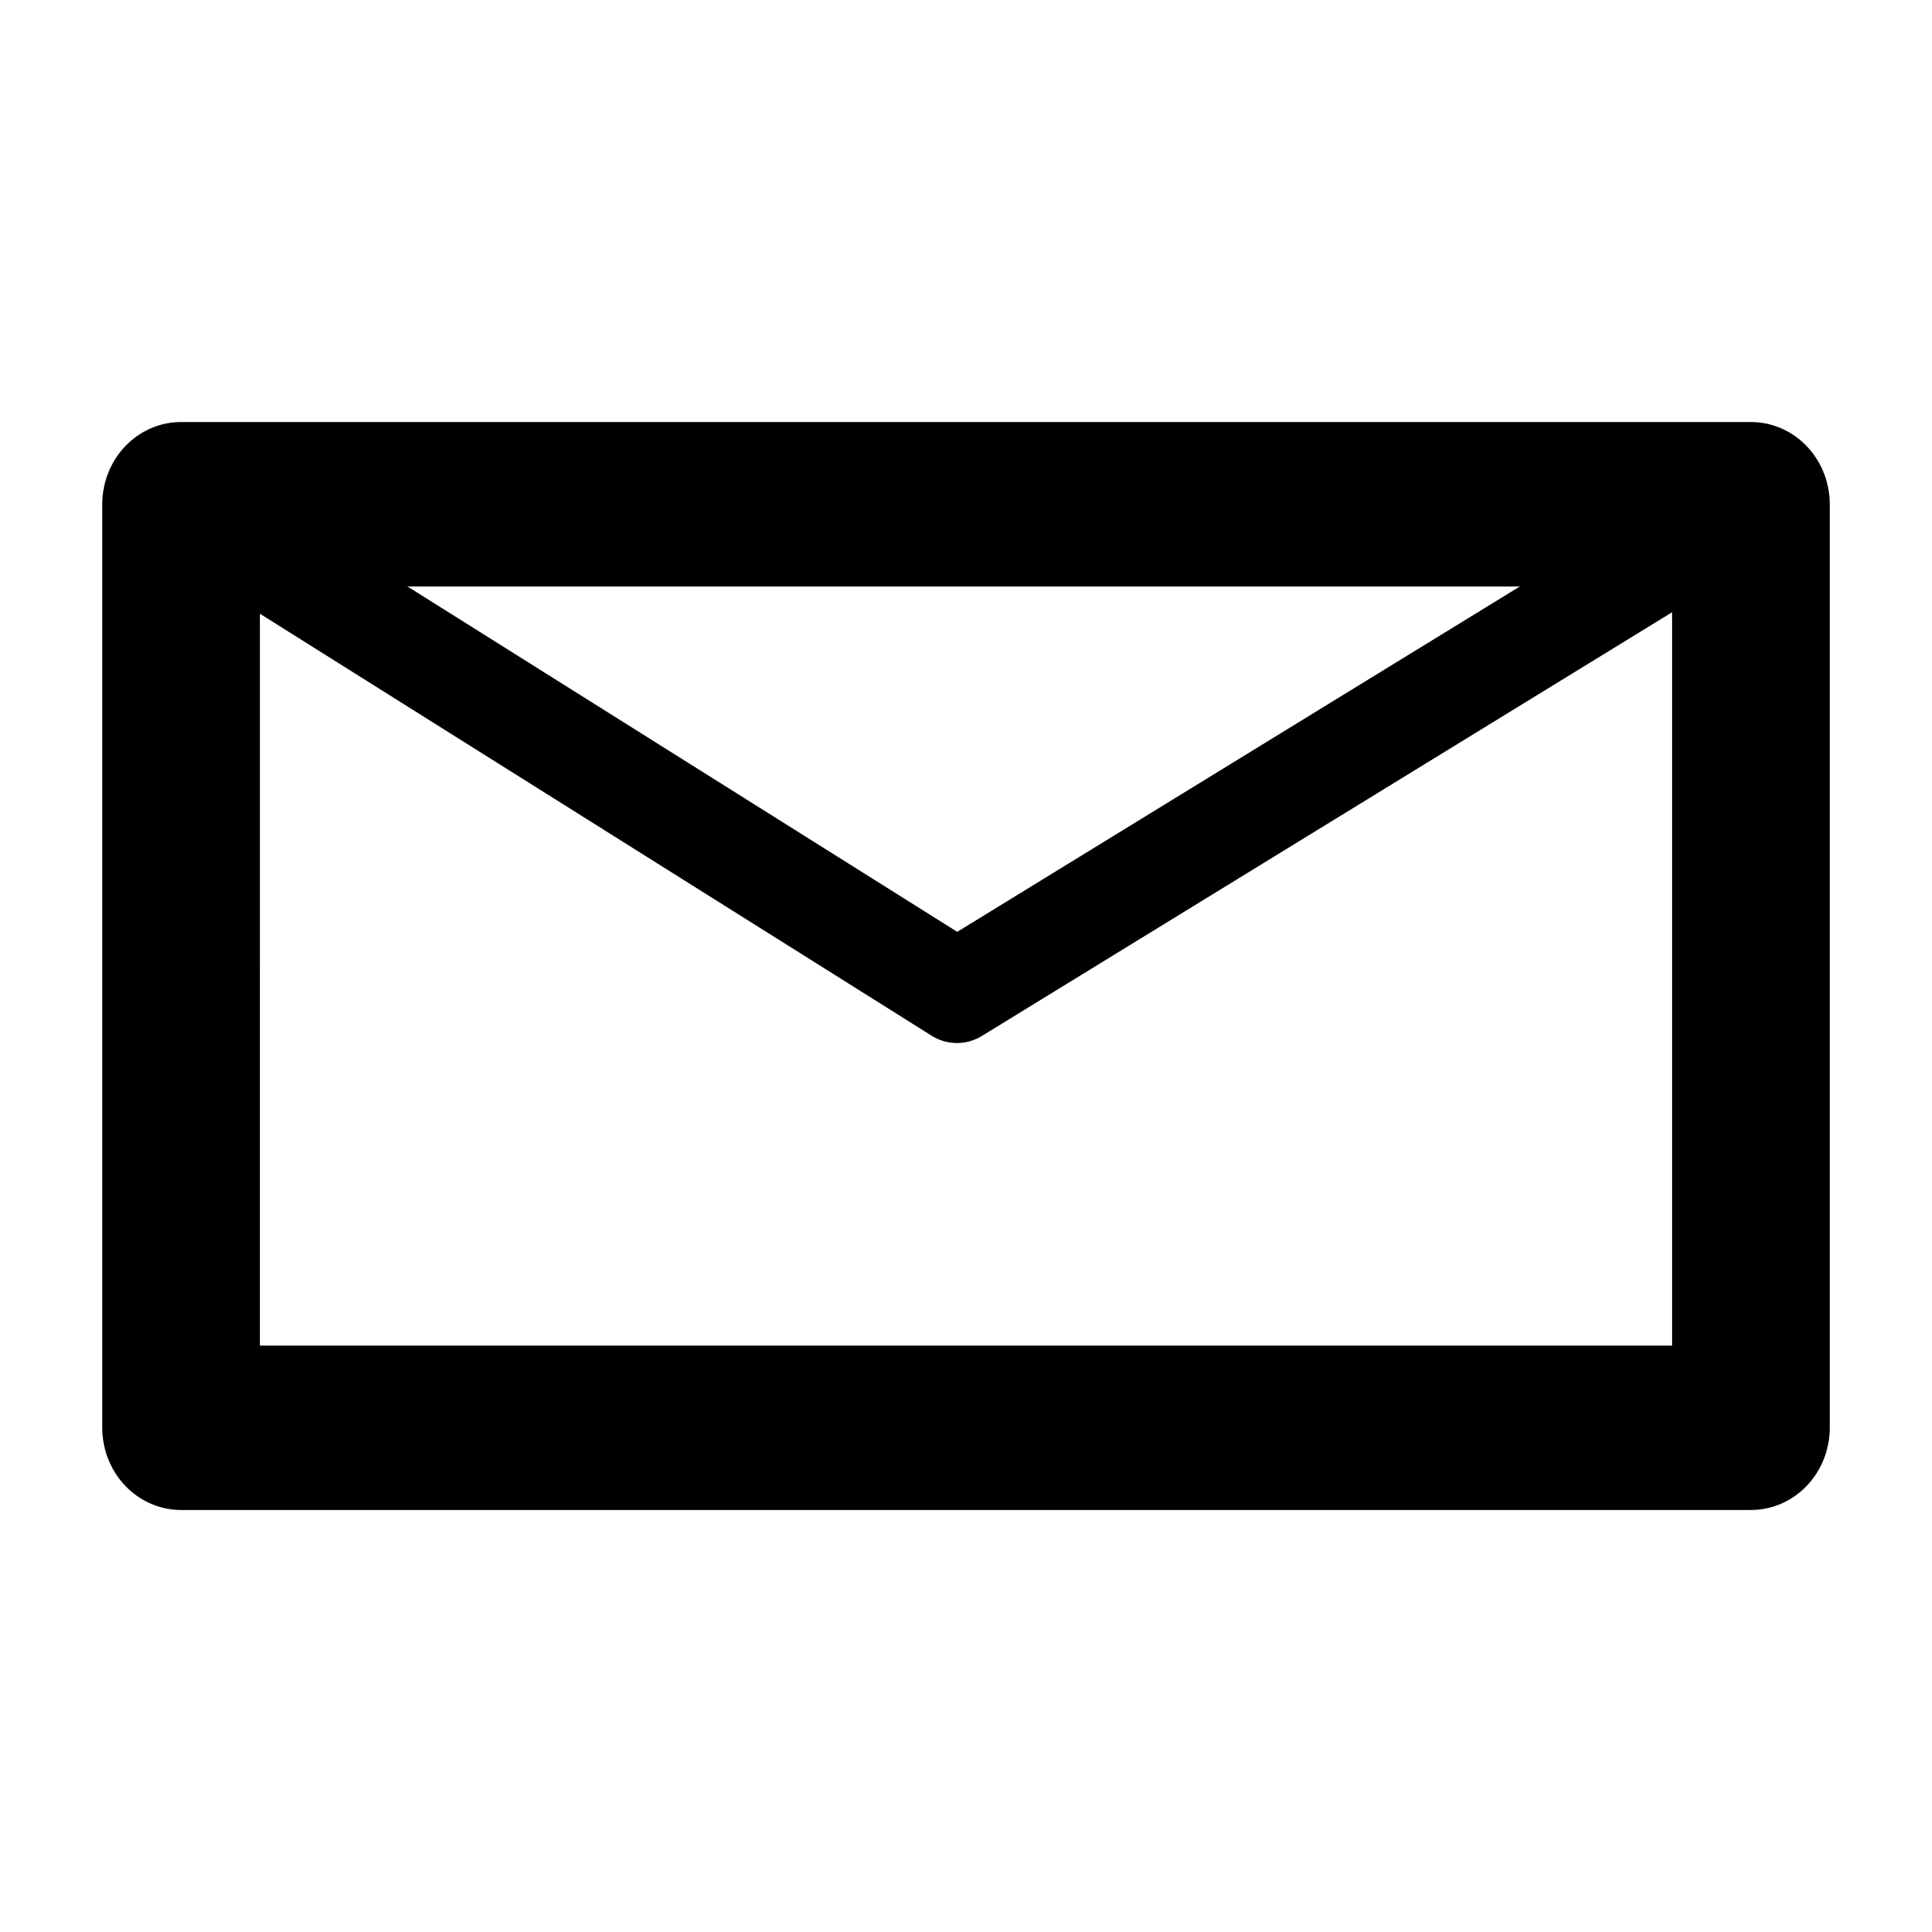 Mail envelope or email icon for web vector clip art image